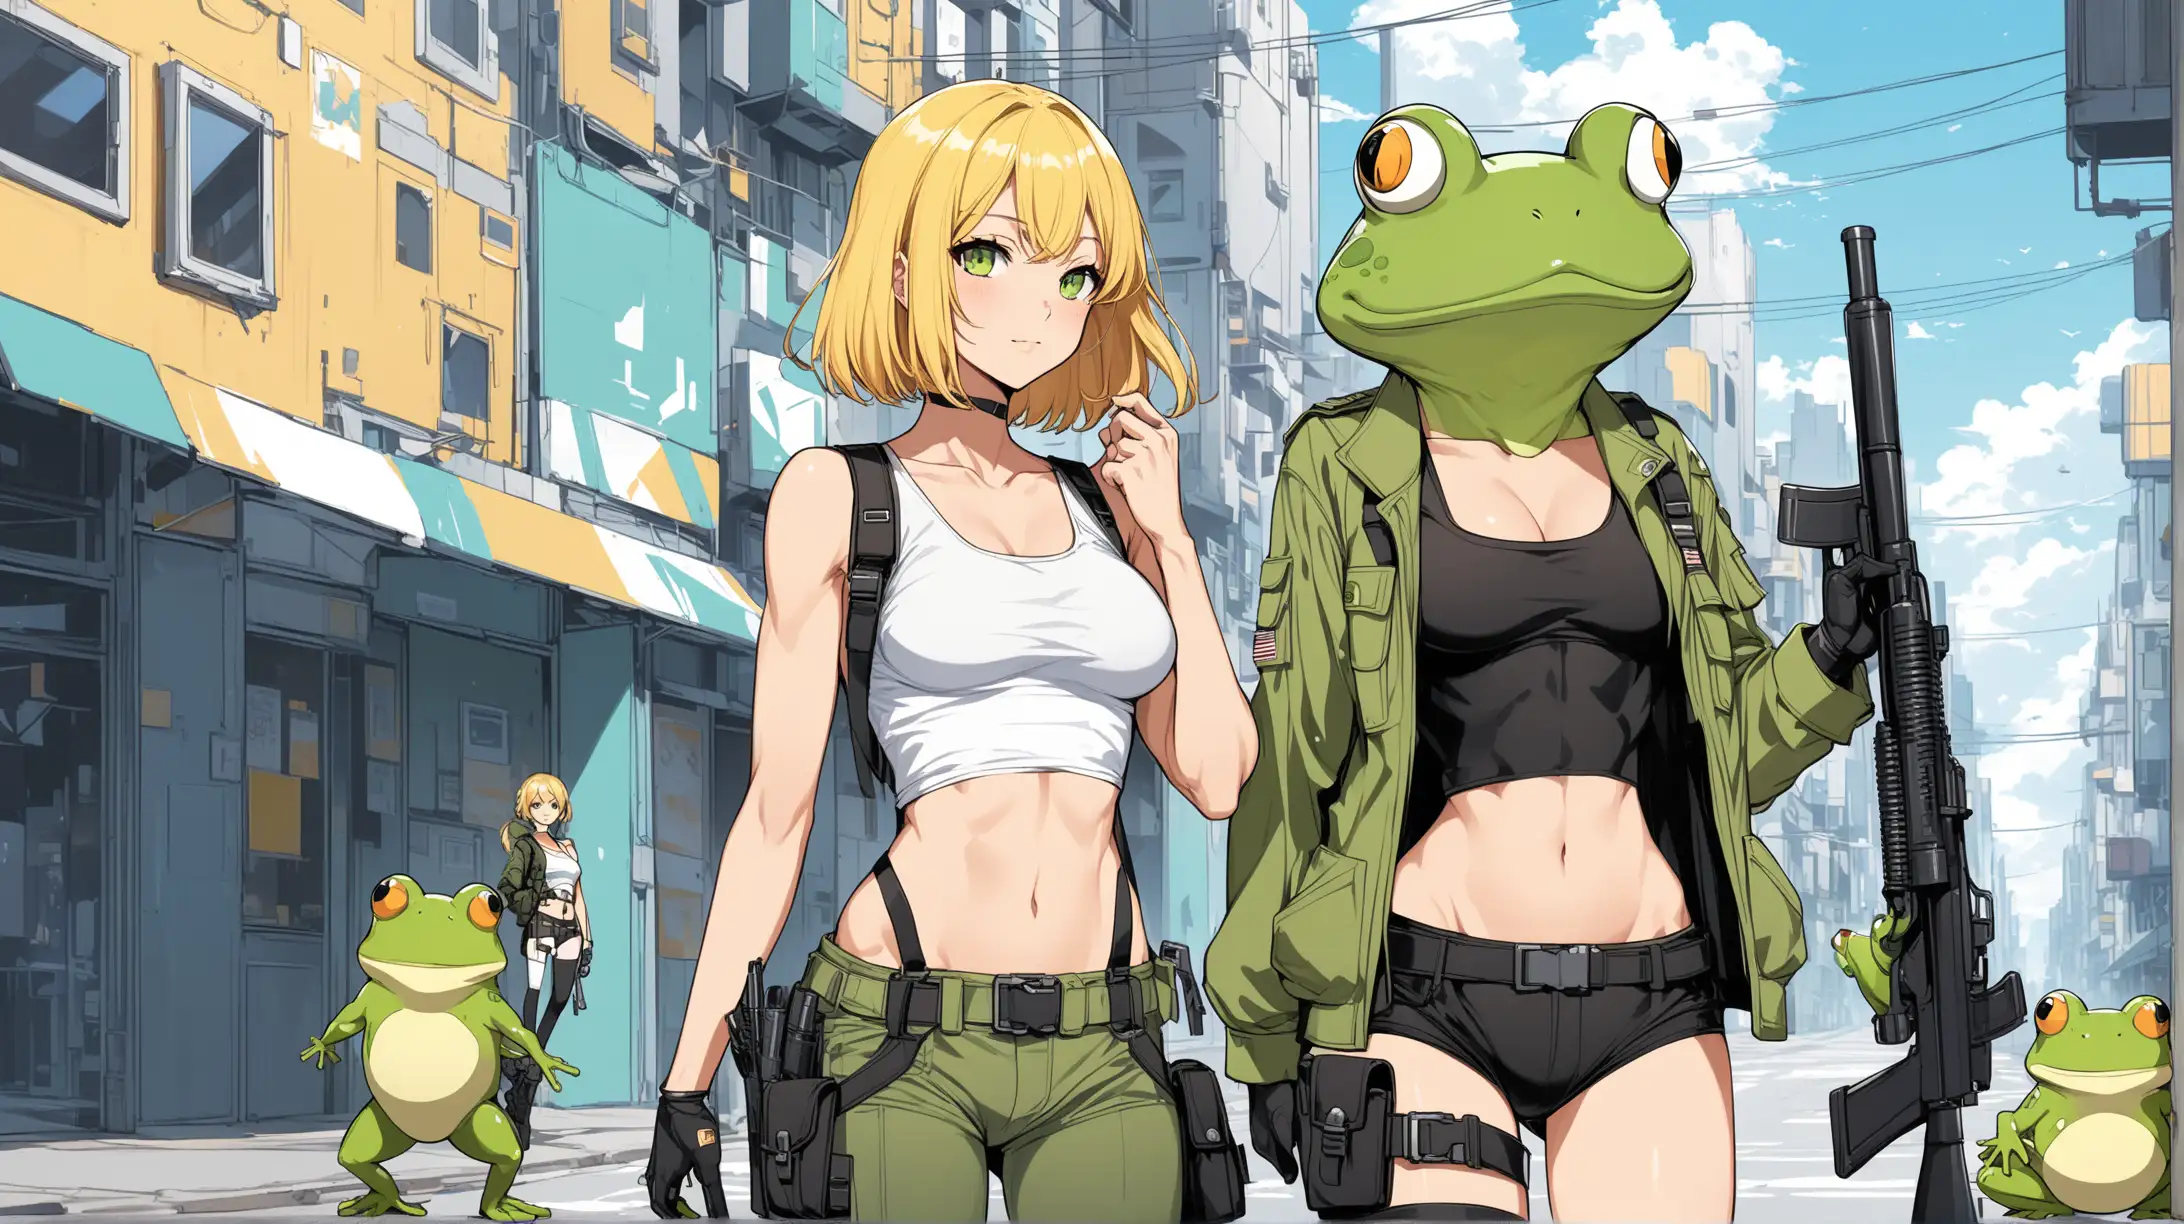 sexy fit 24 year old hero girl, short chin length yellow hair, posing in futuristic town, super skinny toned body, short white tank top, sexy midriff, wearing suspenders, guns in holsters on each thigh, combat boots, yellow black white 3 color minimal design, her sidekick a humanoid frog in a green jacket holding a bazooka stands next to her, grenades hanging on his jacket